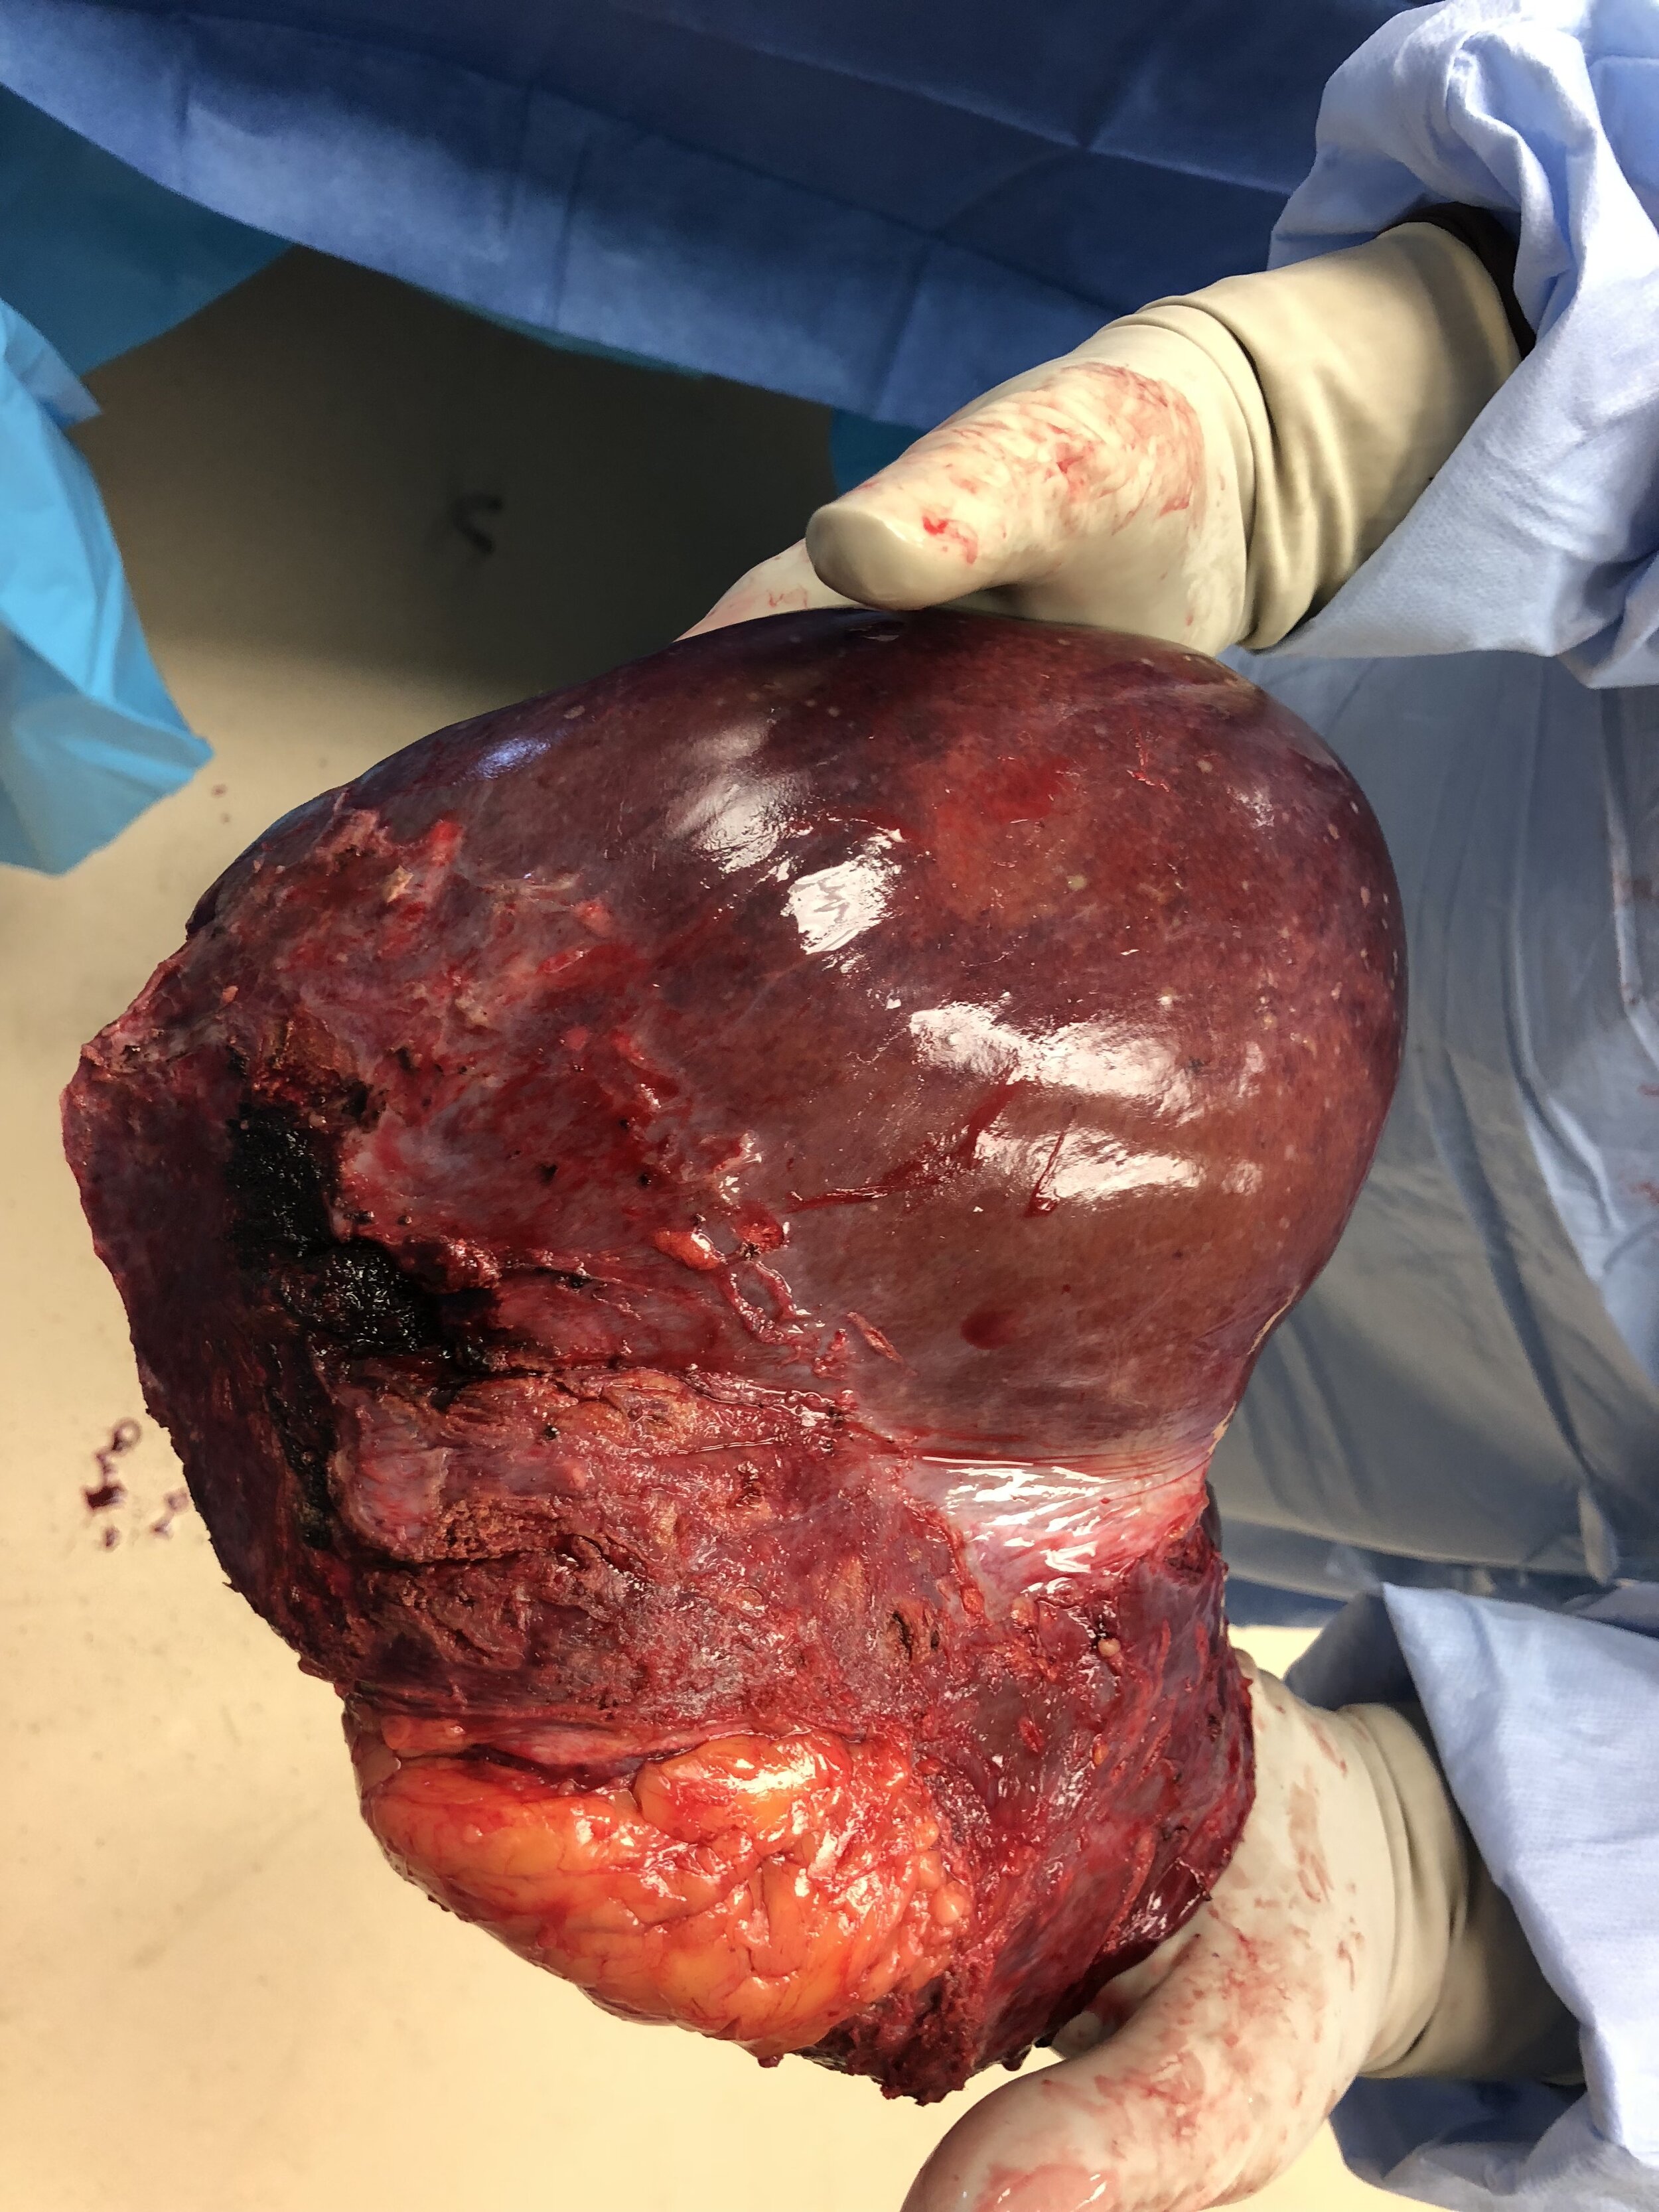 My original liver that they removed.JPG